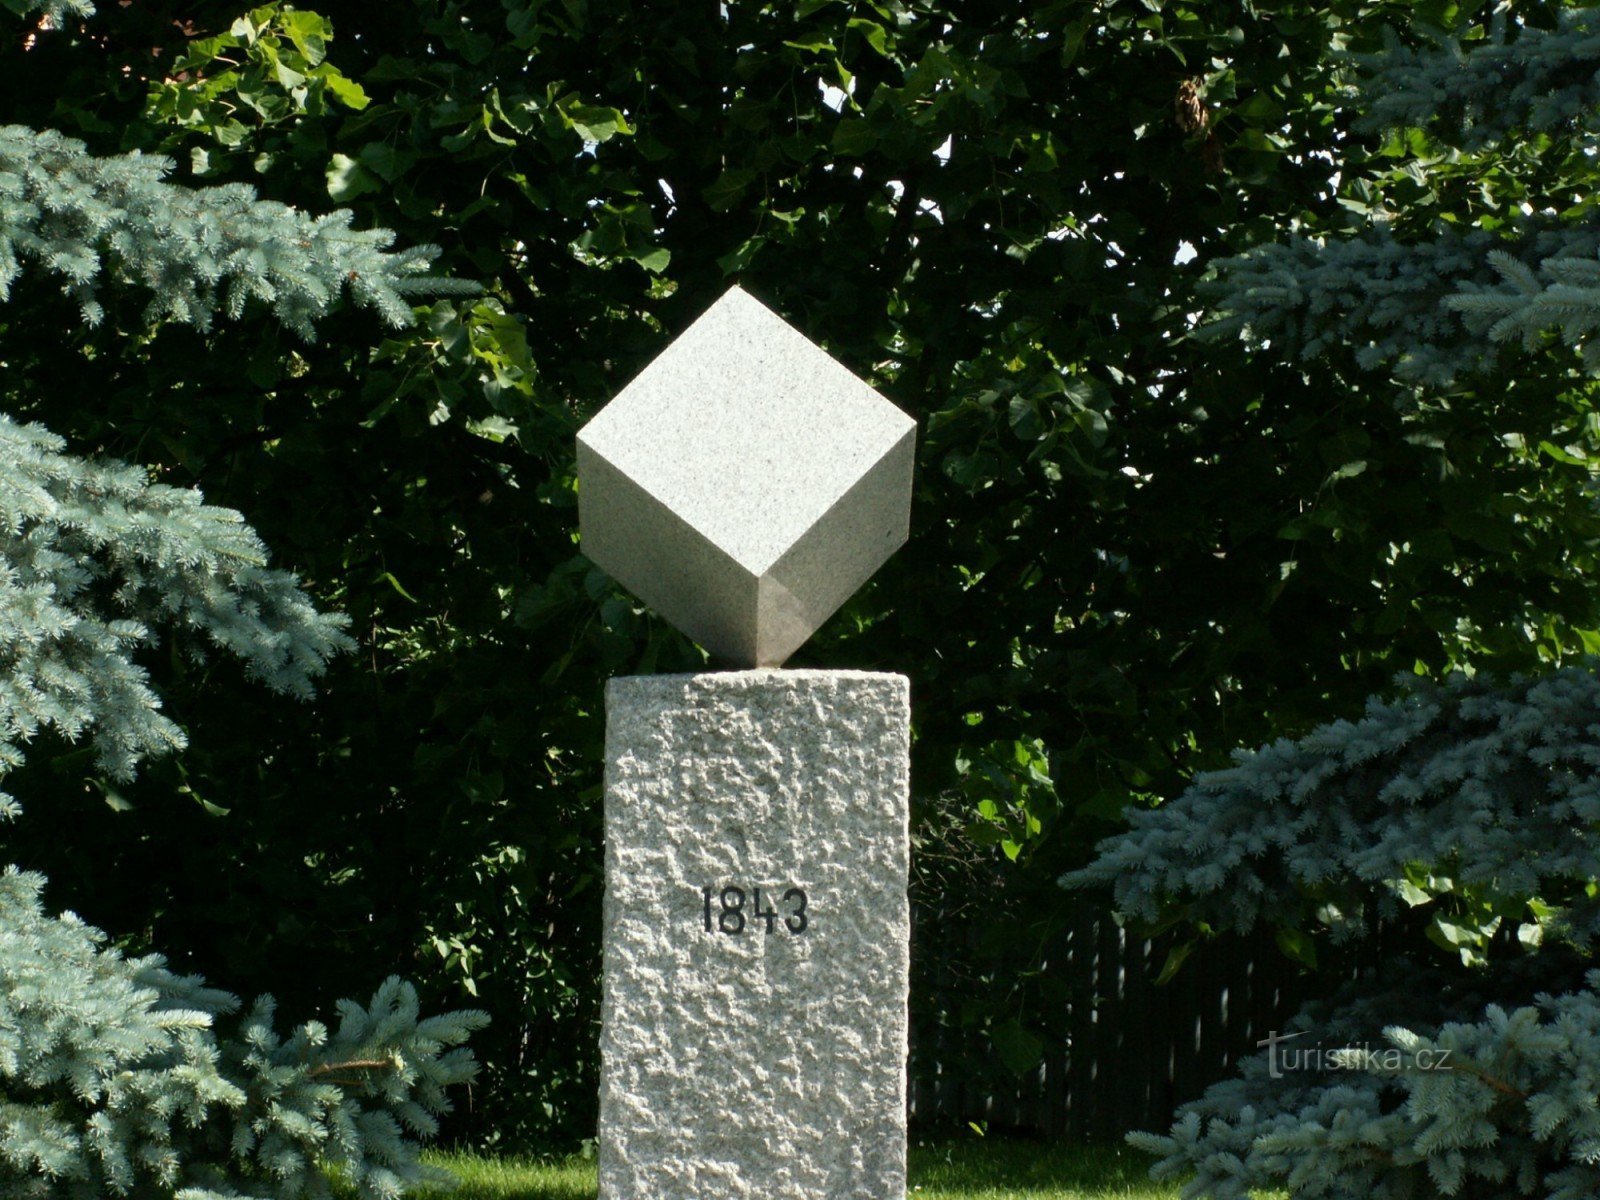 This granite monument was erected in 1983